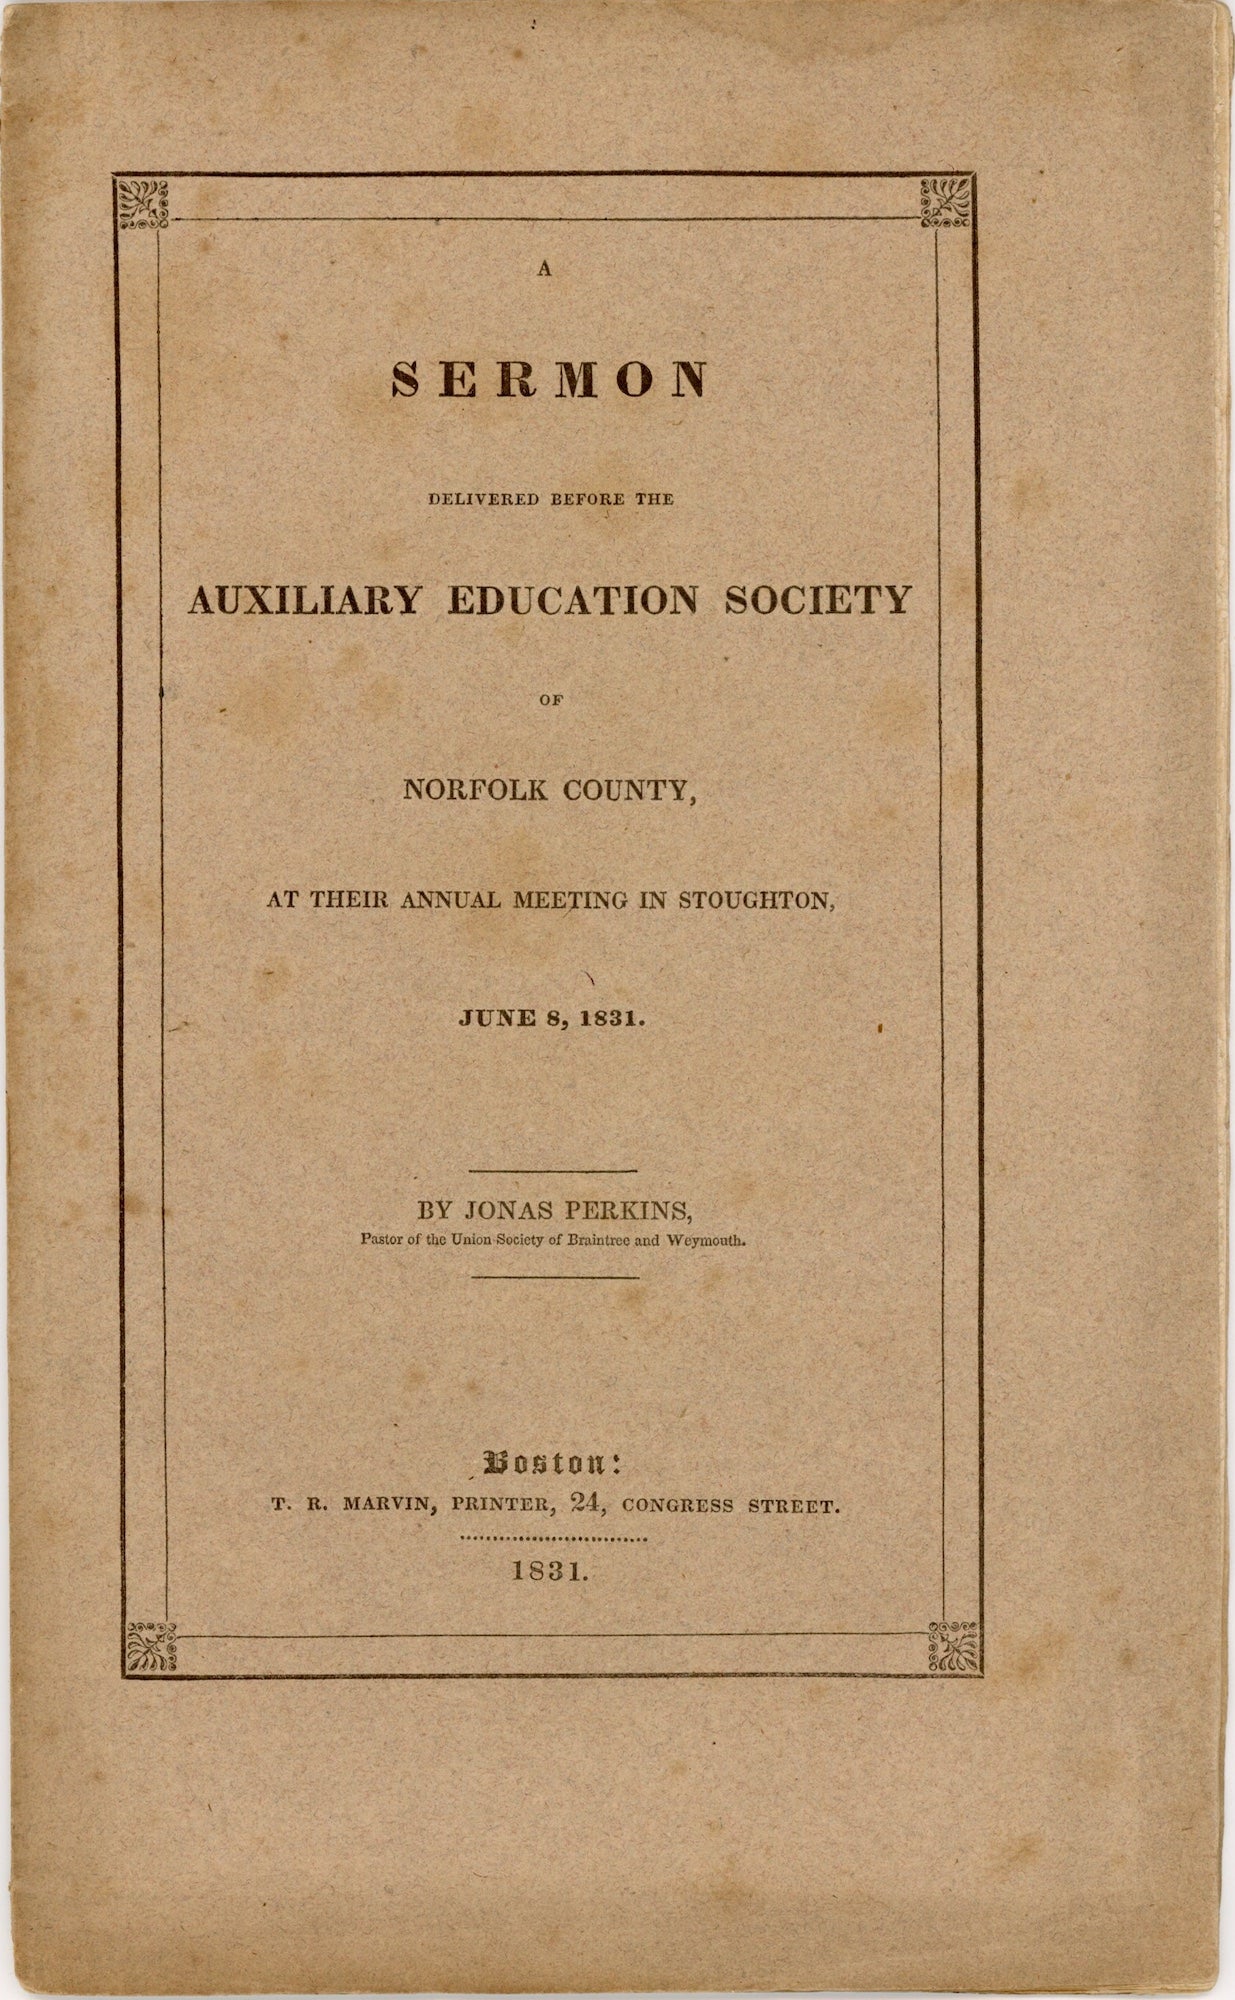 [Religious Education]. Perkins, Jonas - A Sermon Delivered Before the Auxiliary Education Society of Norfolk County, at Their Annual Meeting in Stoughton, June 8, 1831